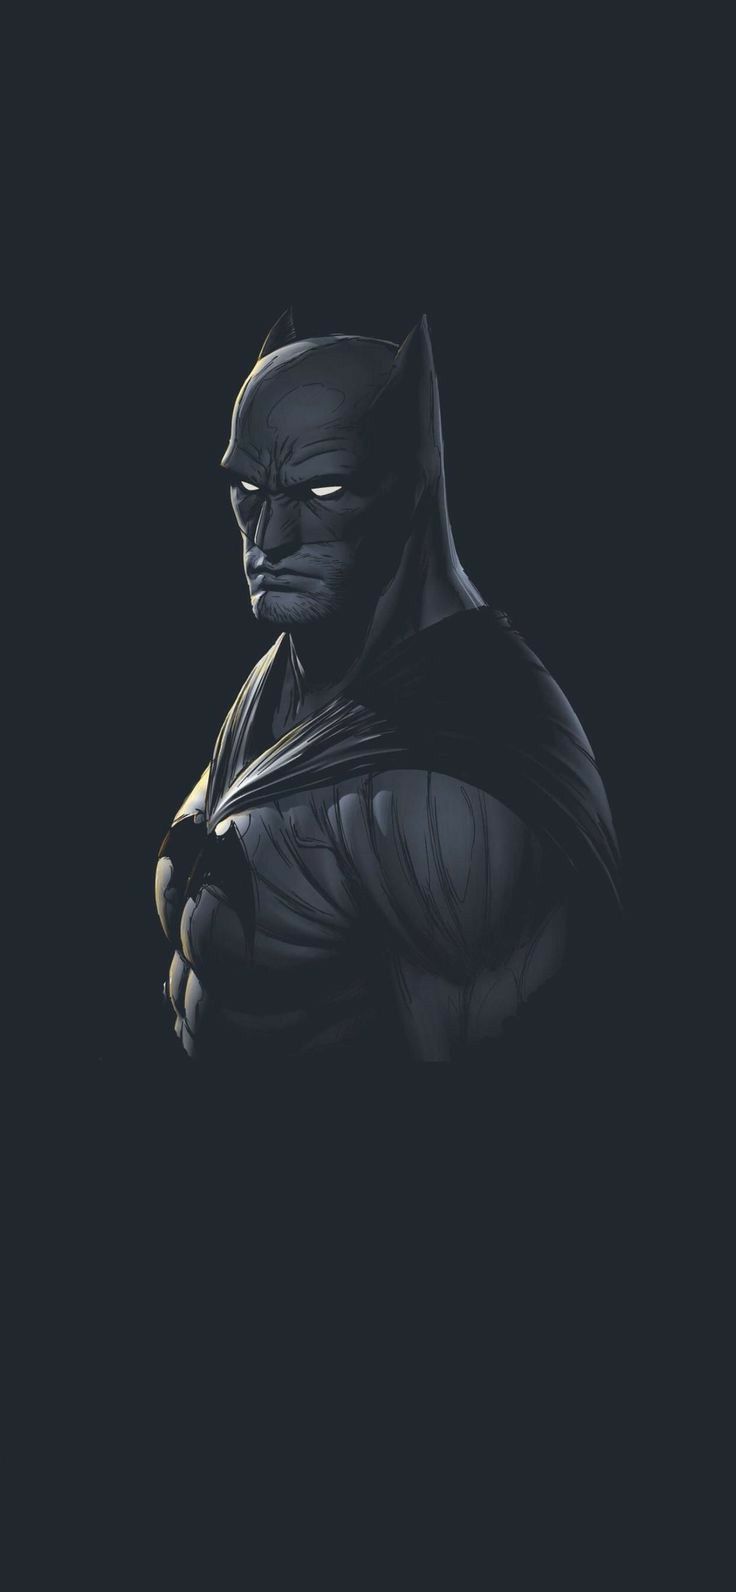 Iphone wallpapers from a photo marvel  dc  rMarvel